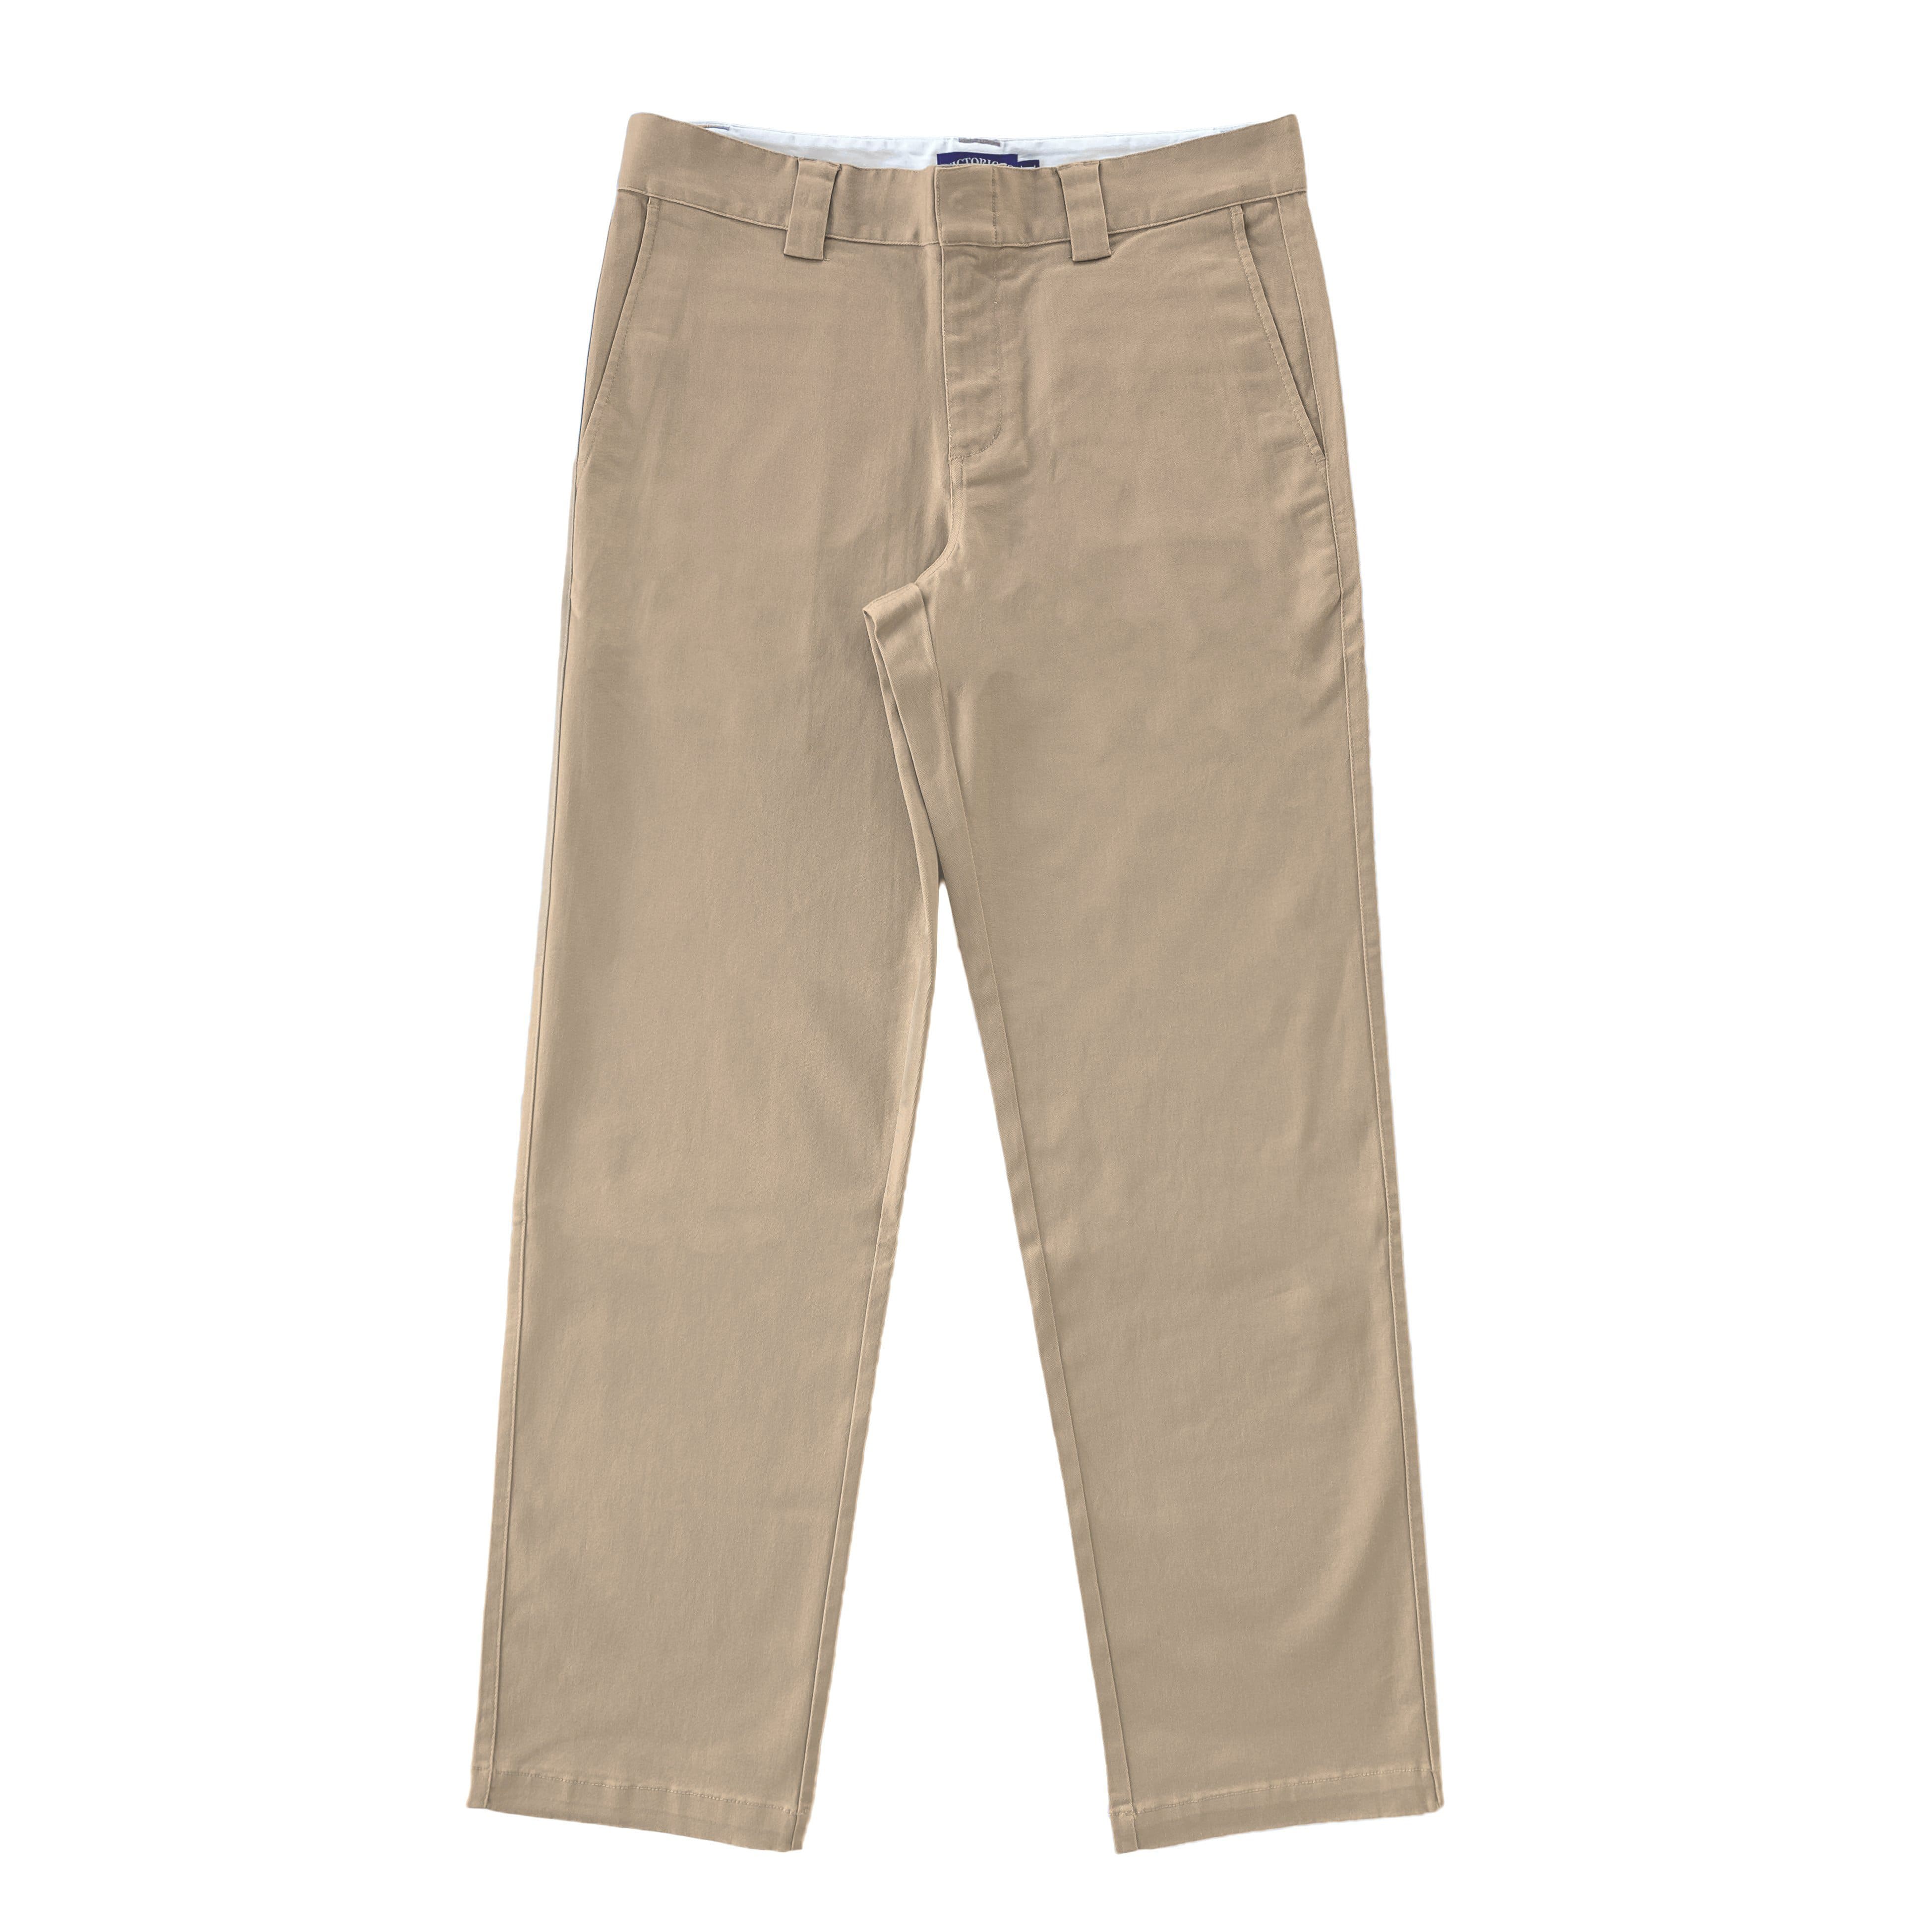 Premium quality classic heavy-duty work pants by New Zealand skate and streetwear clothing label VIC Apparel. American classic vintage workwear style. Loose fit. Relaxed through the hip and thigh, with a slightly tapered leg 